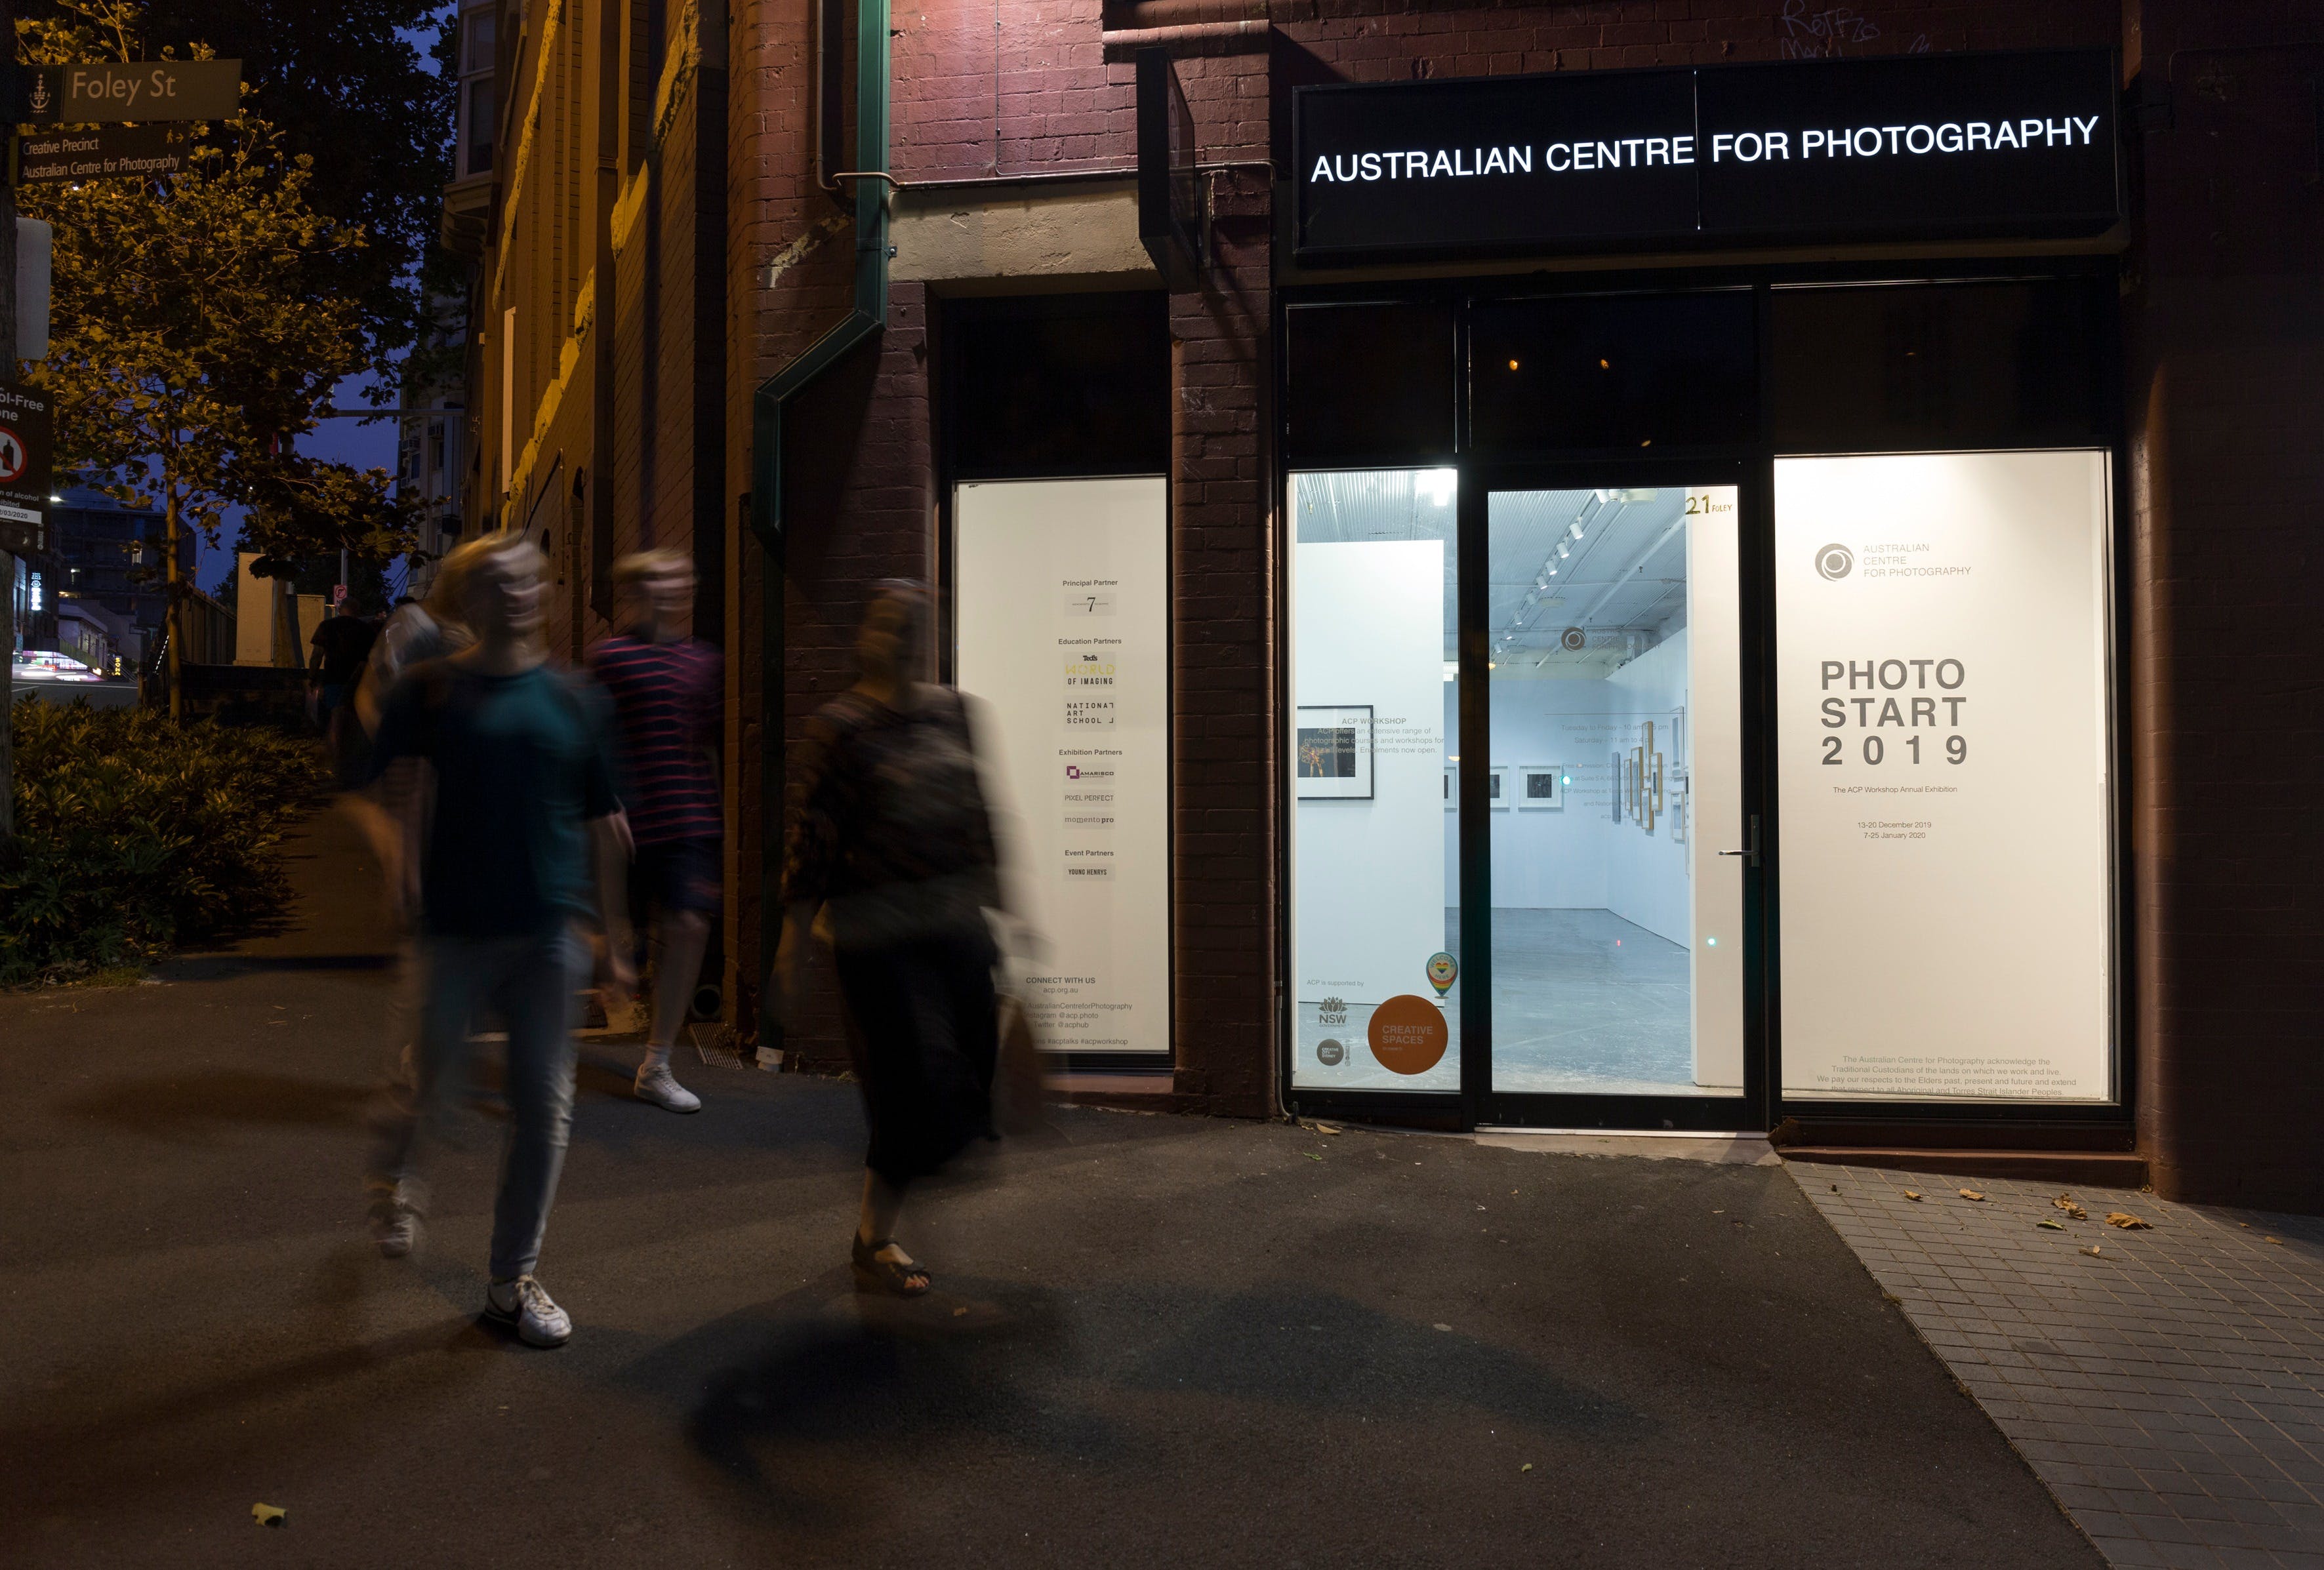 Australian Centre for Photography - Attractions Sydney